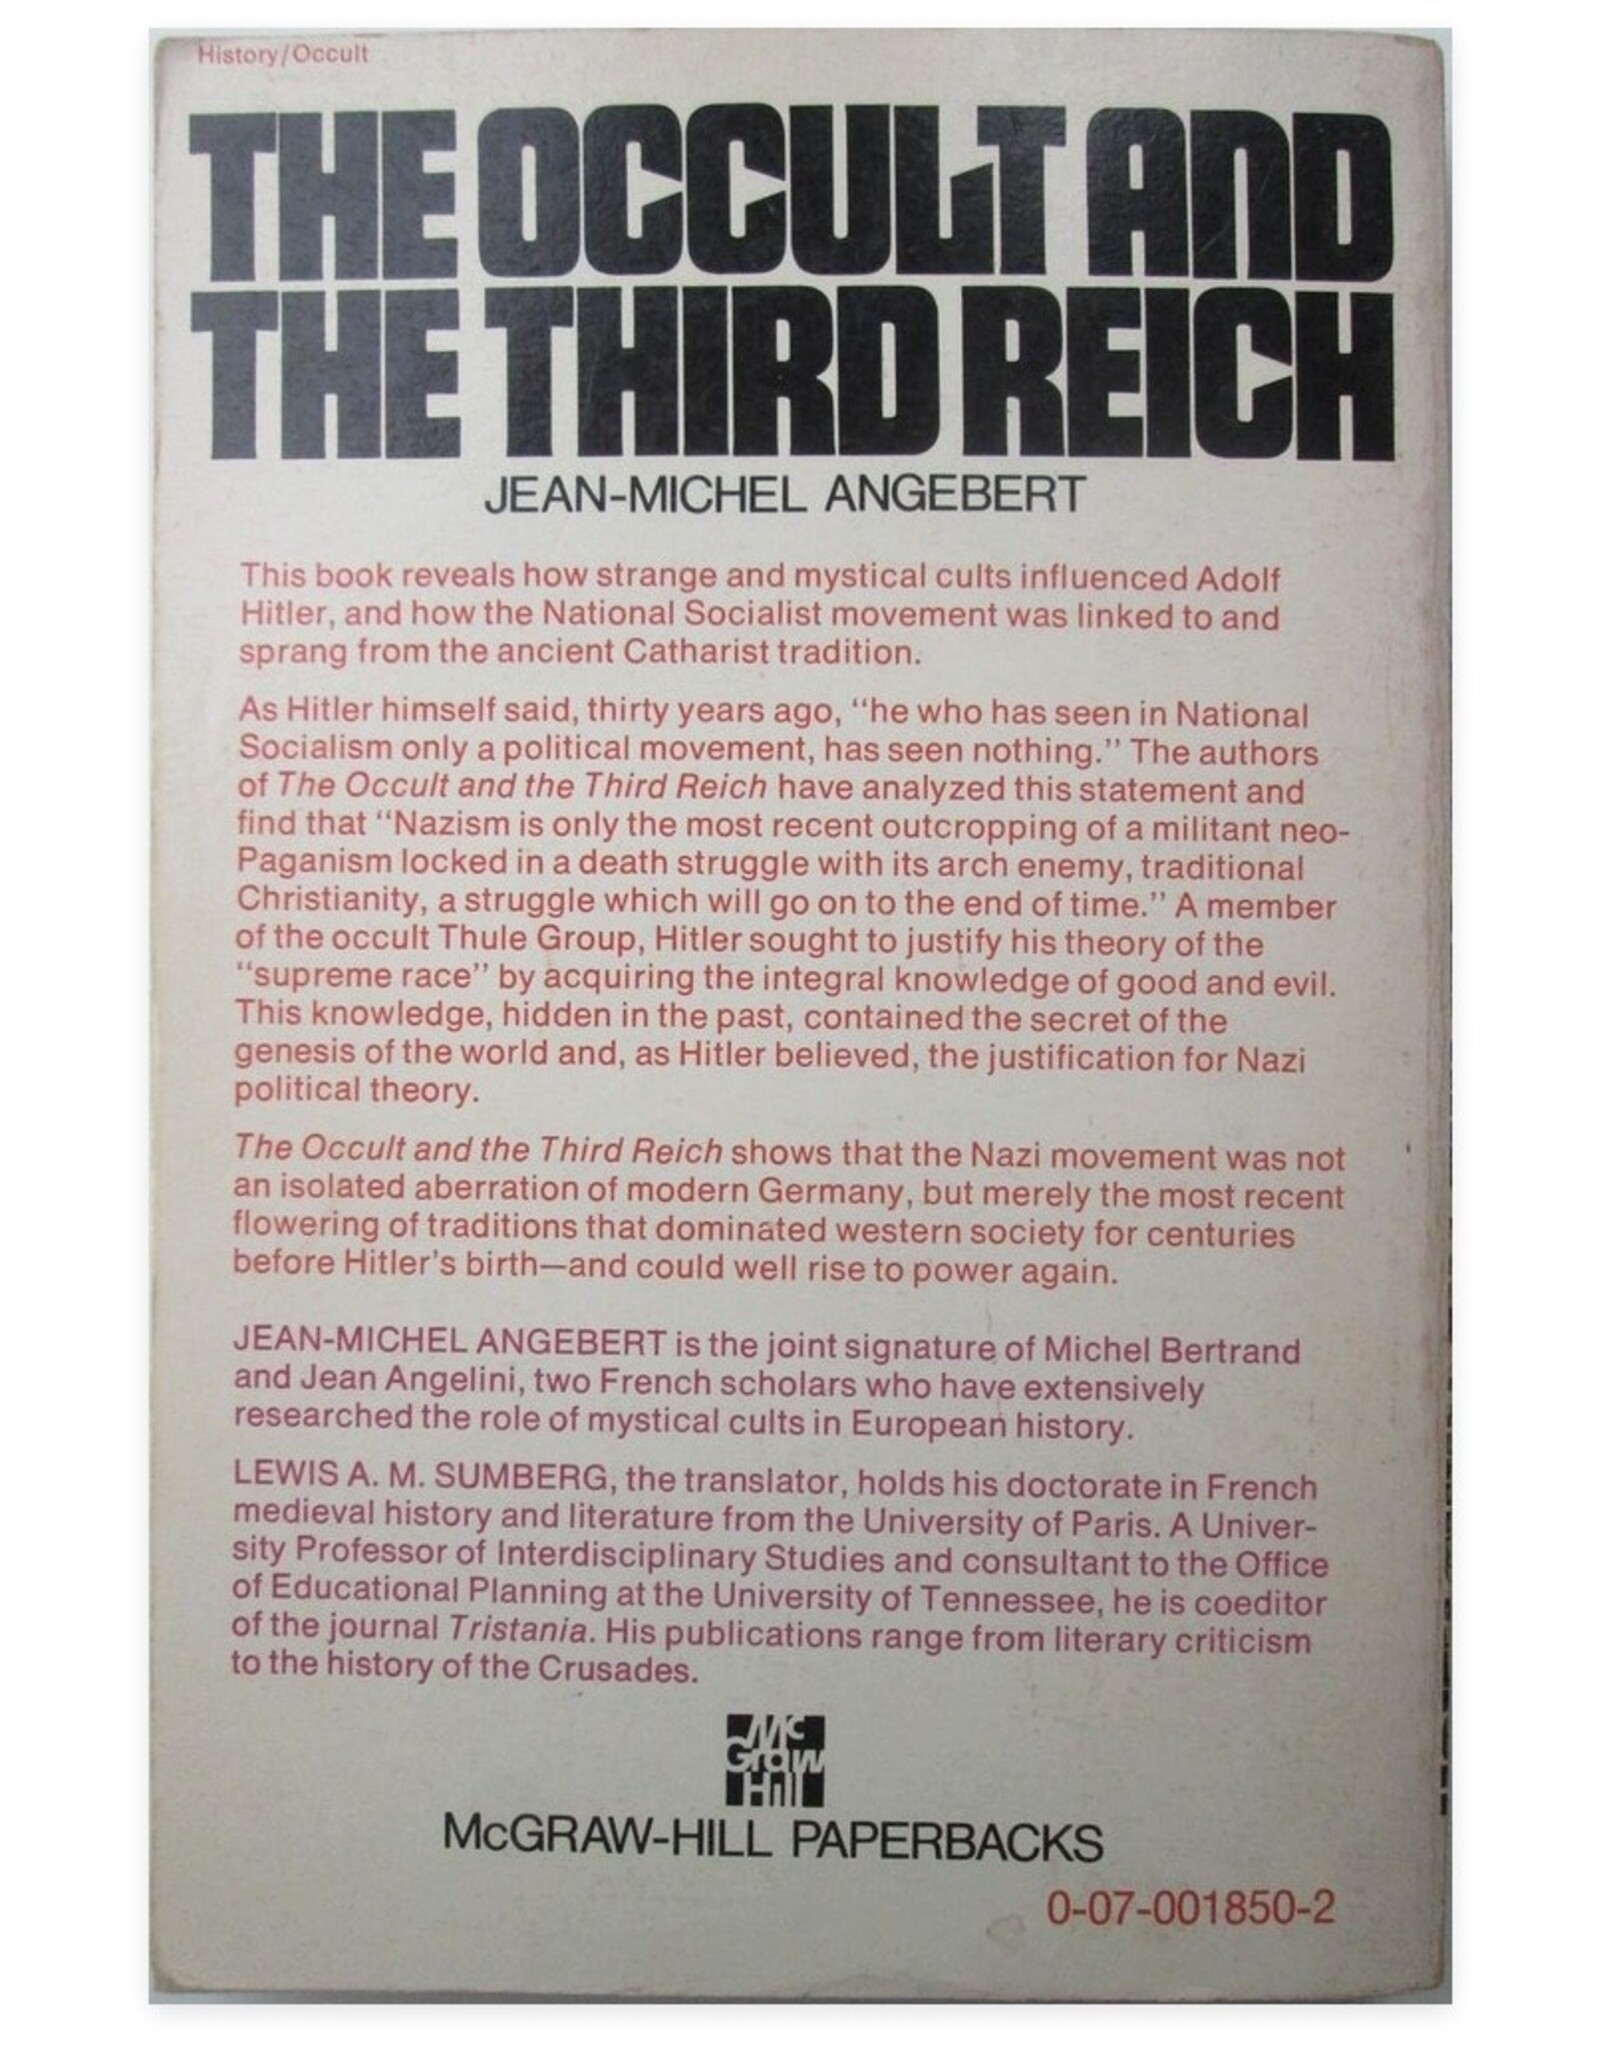 Jean-Michel Angebert - The Occult and the Third Reich. The Mystical Origins of Nazism and the Search for the Holy Grail